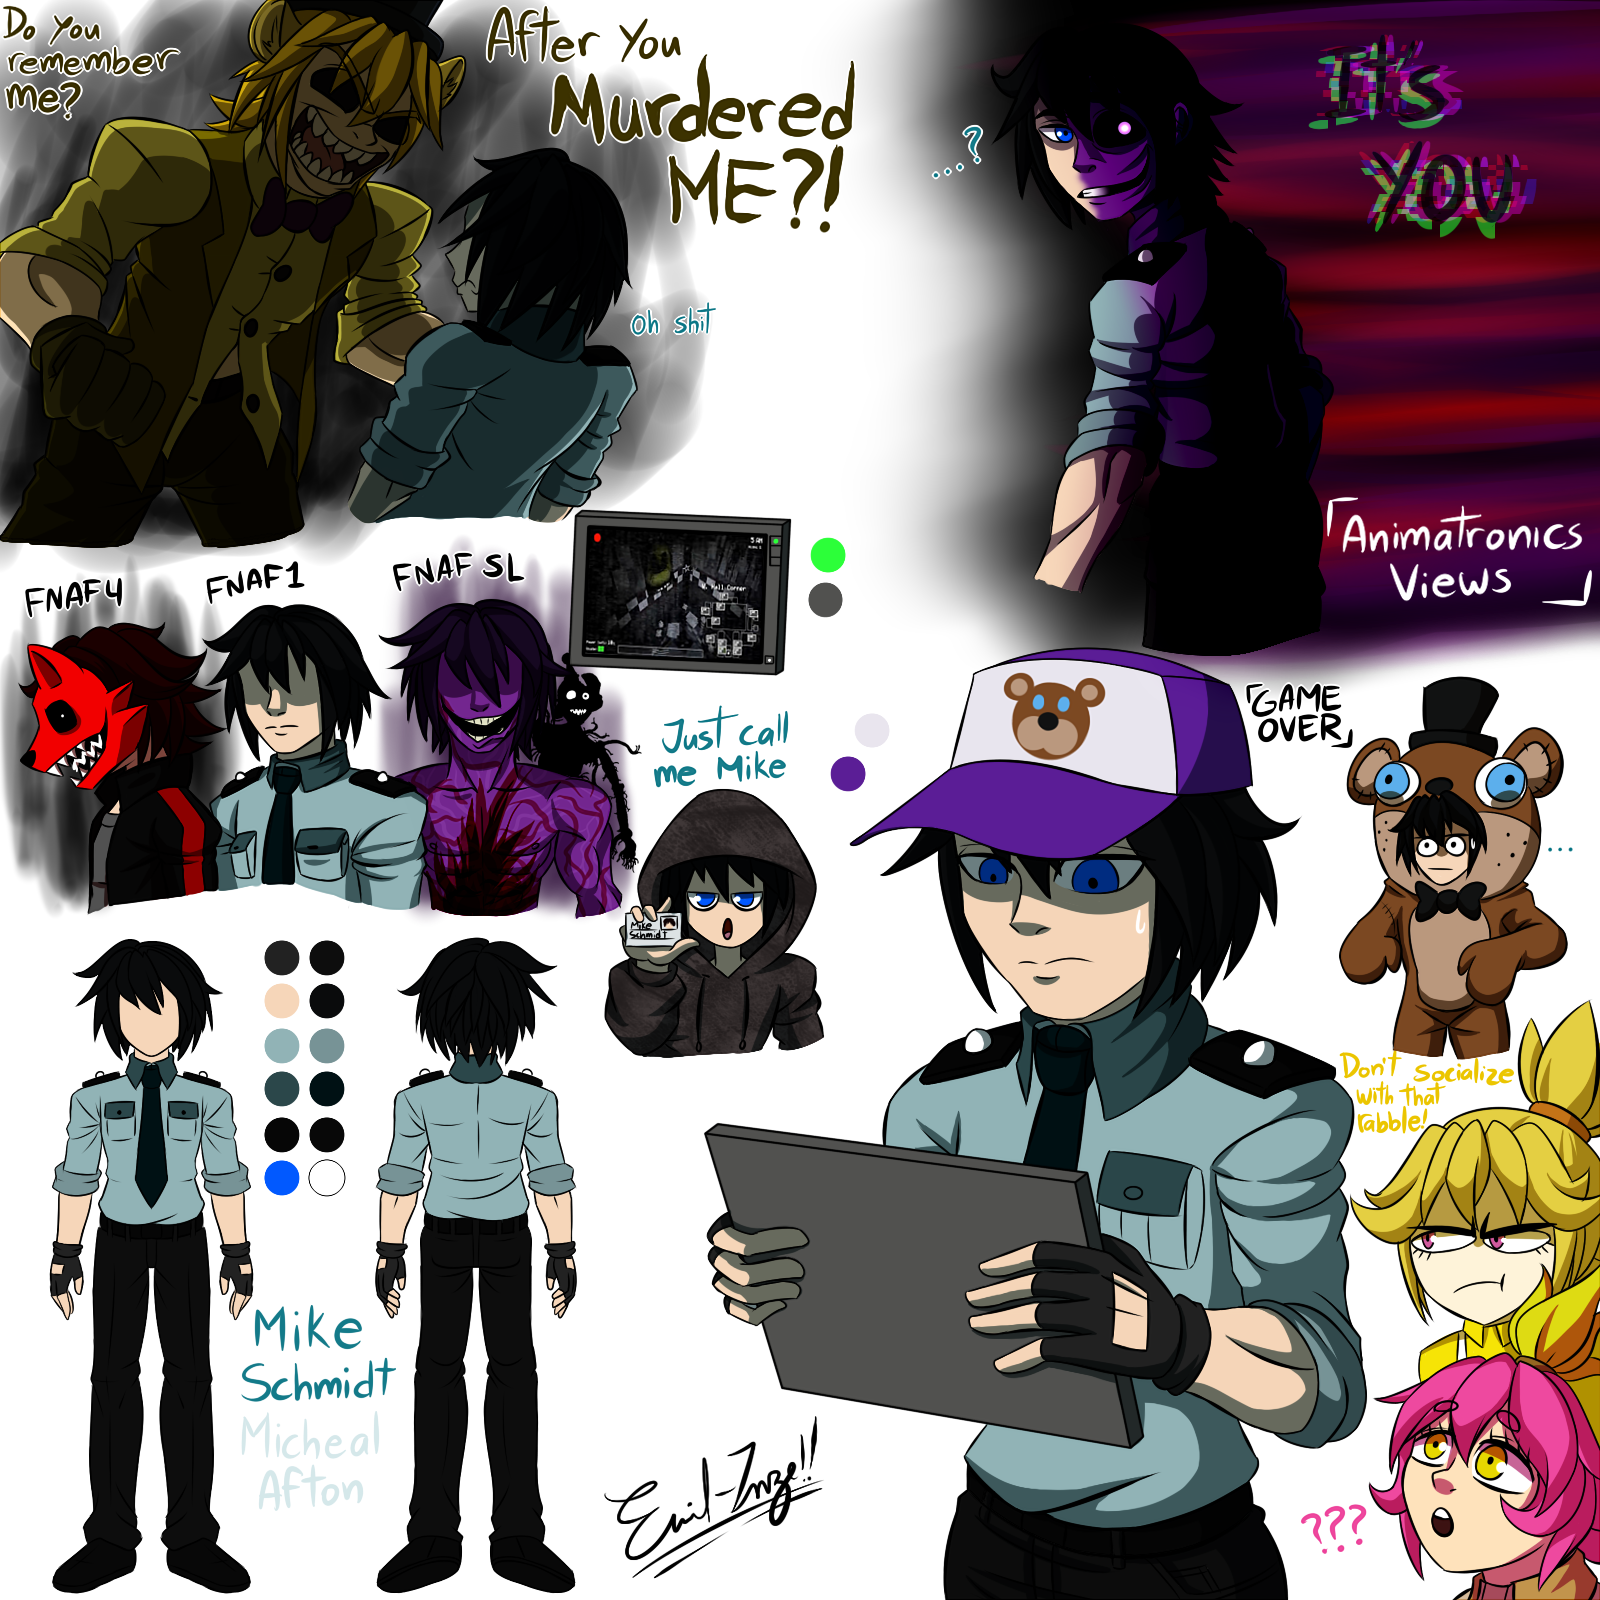 Five Nights at Freddy's 1 Concept by Emil-Inze on DeviantArt